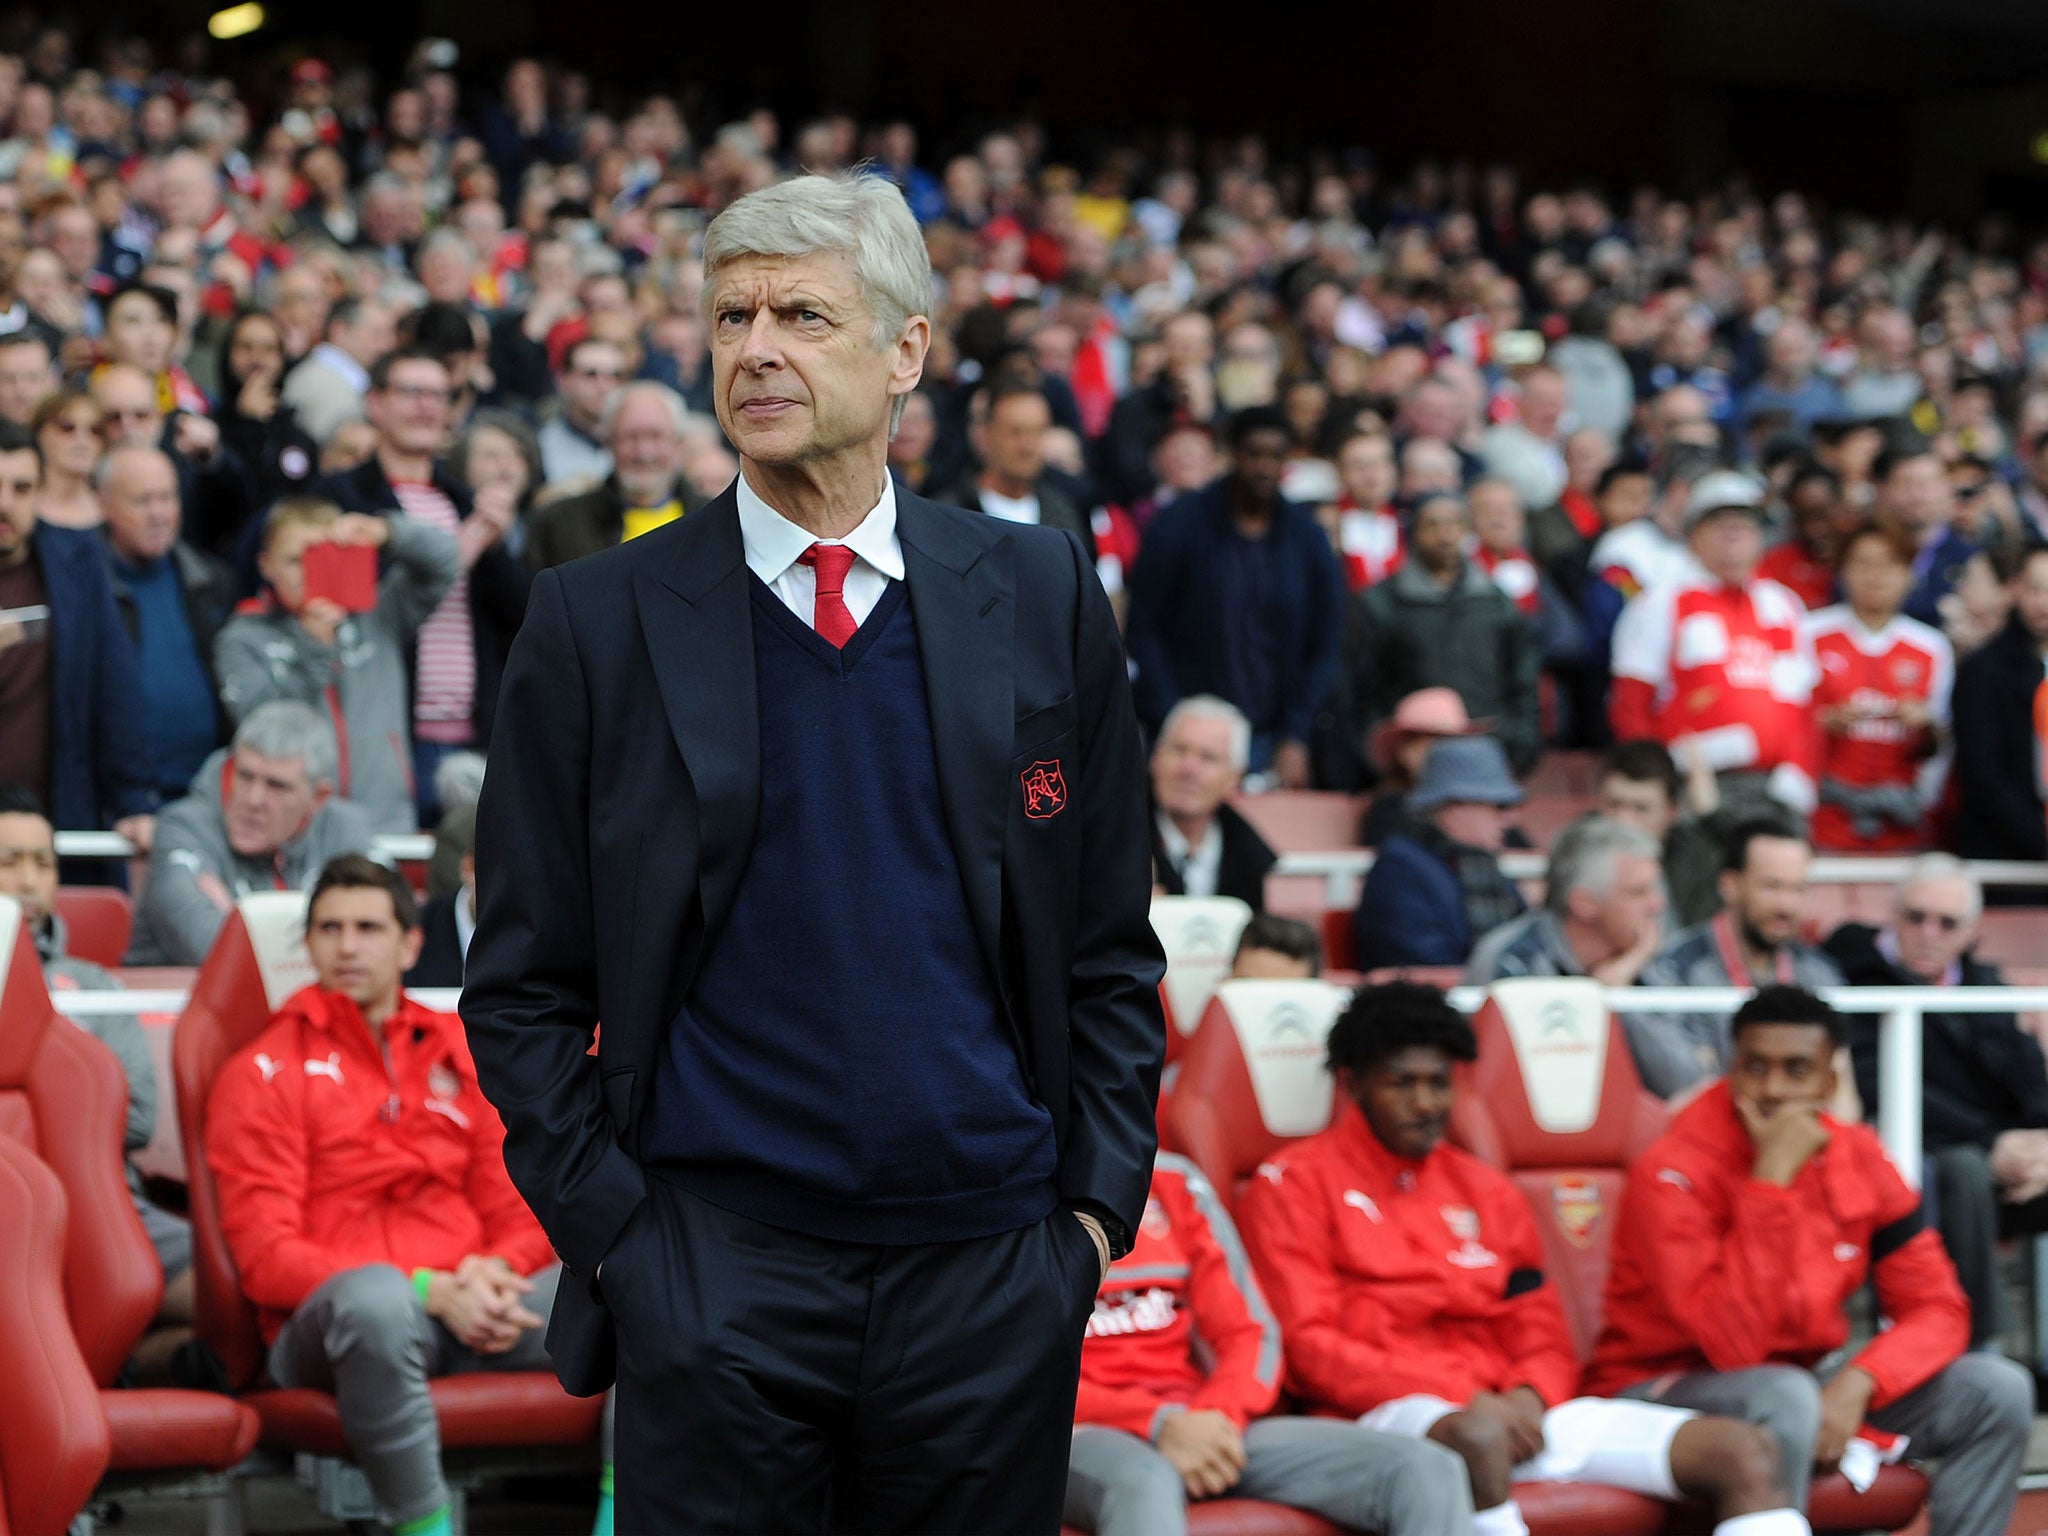 Wenger endured another turbulent afternoon at the Emirates